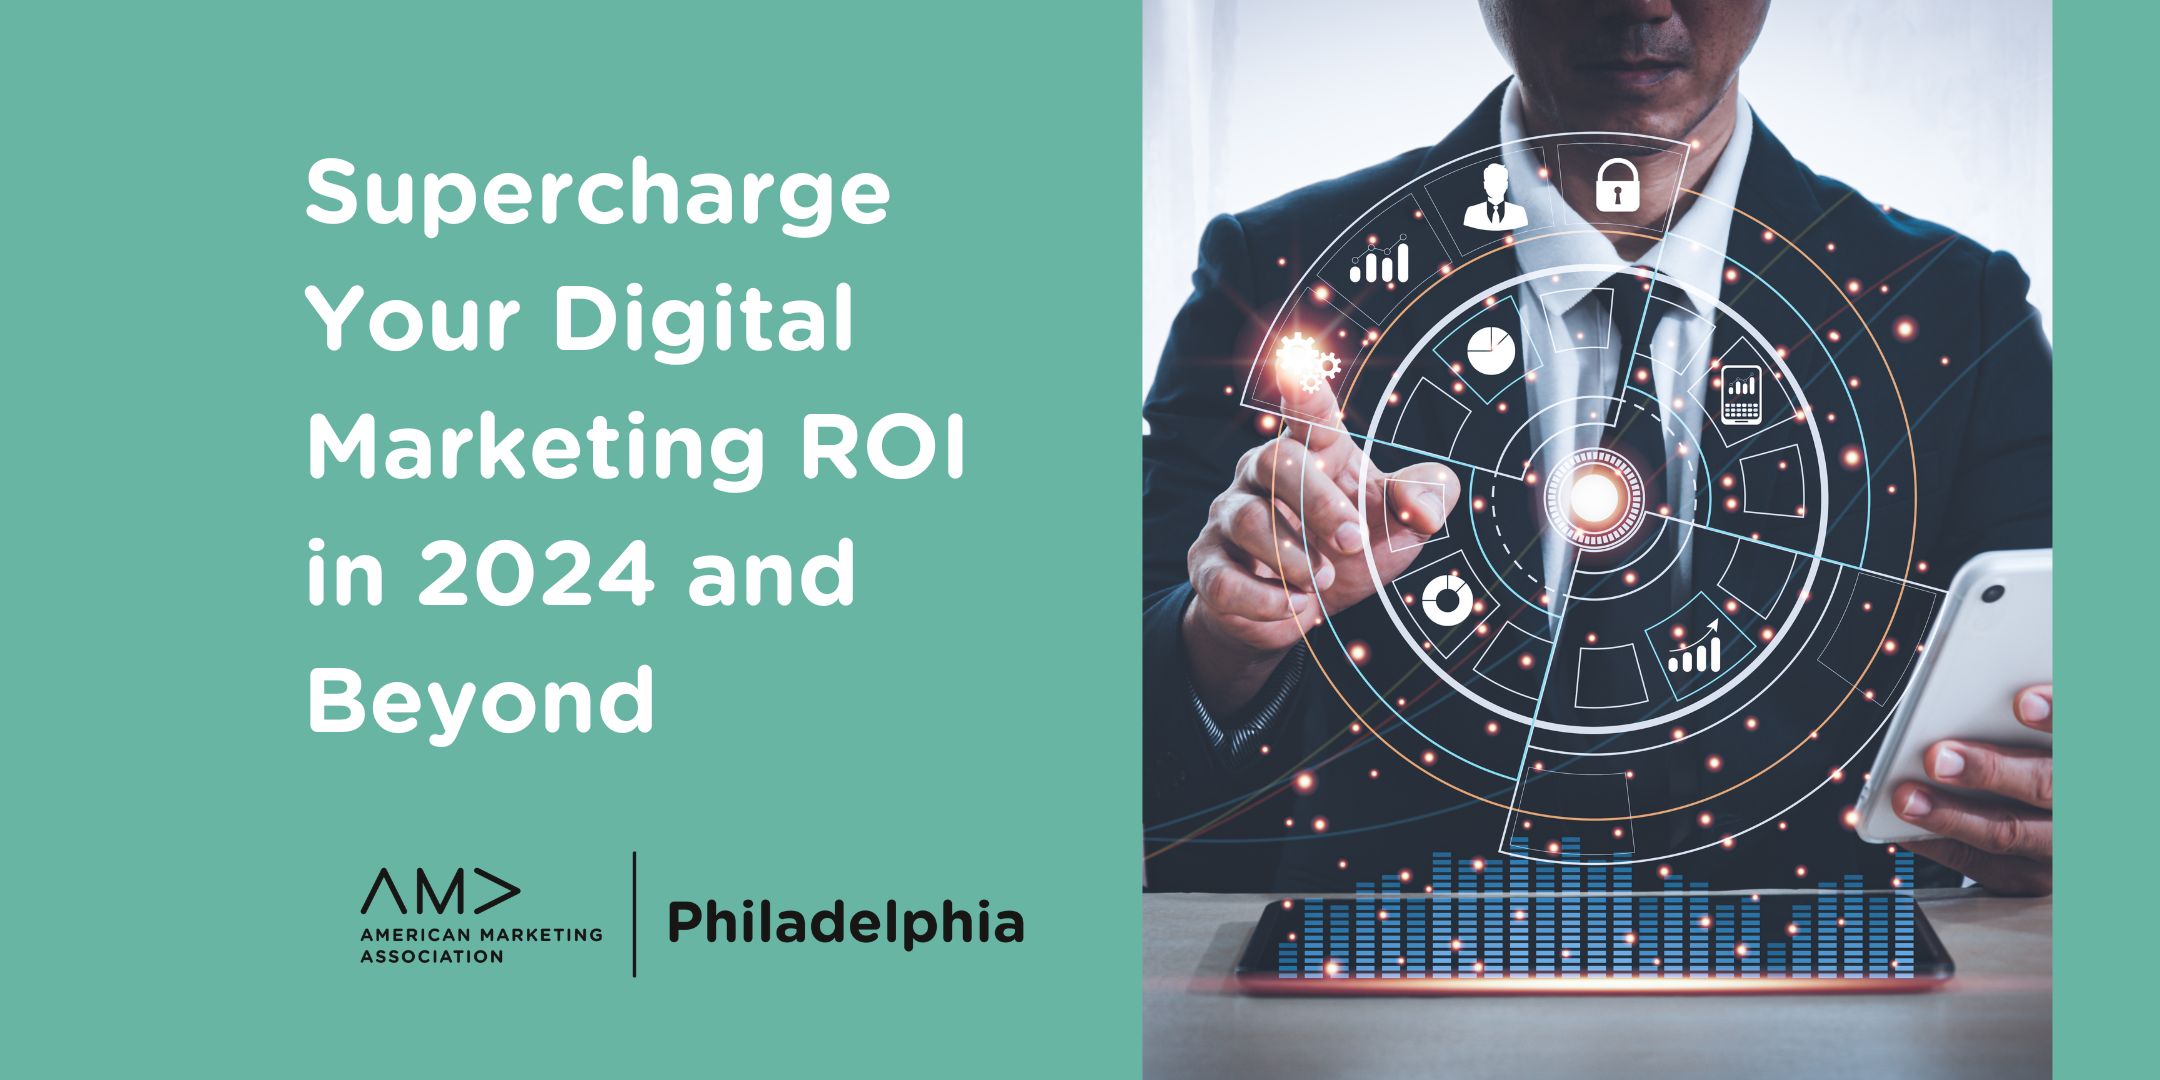 Supercharge Your Digital Marketing ROI in 2024 and Beyond